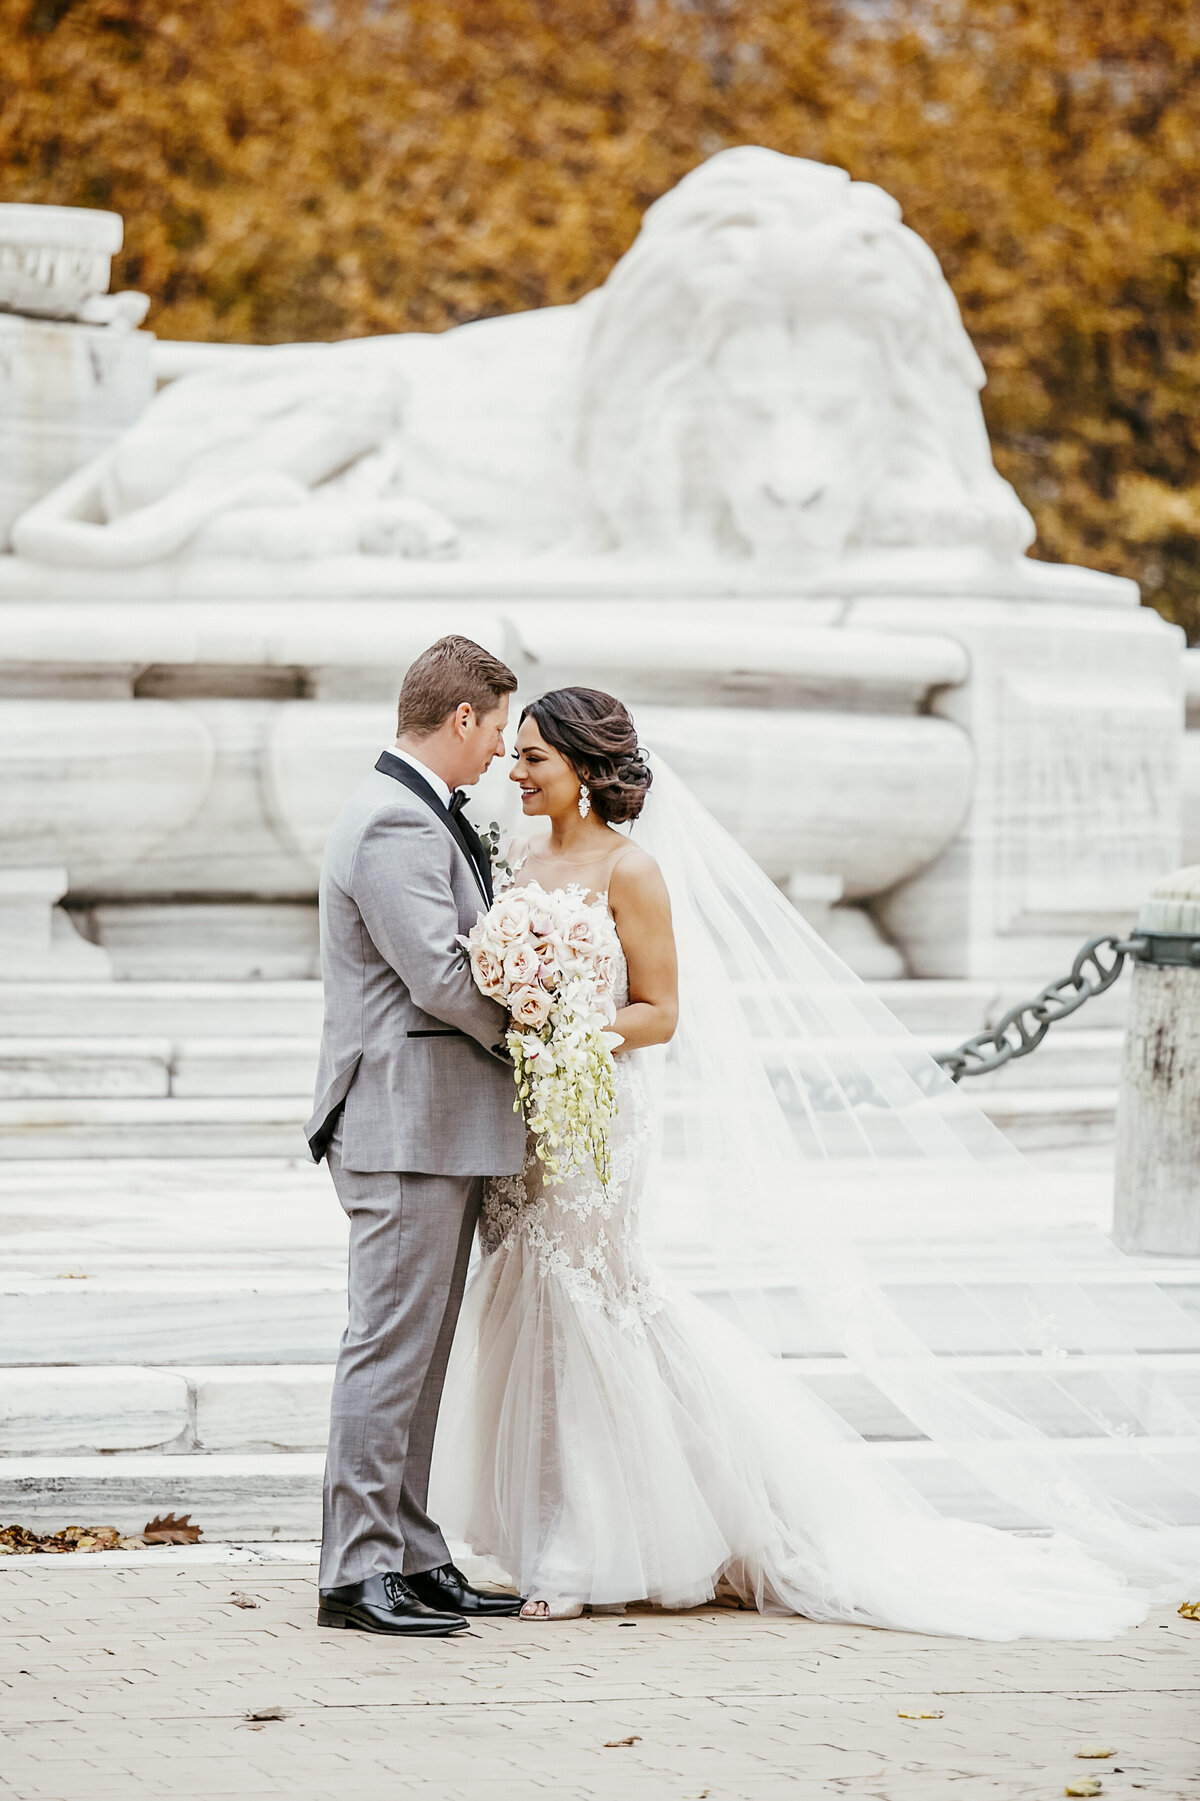 Autumn wedding with bride and groom embracing in front of monument in Buffalo, New York